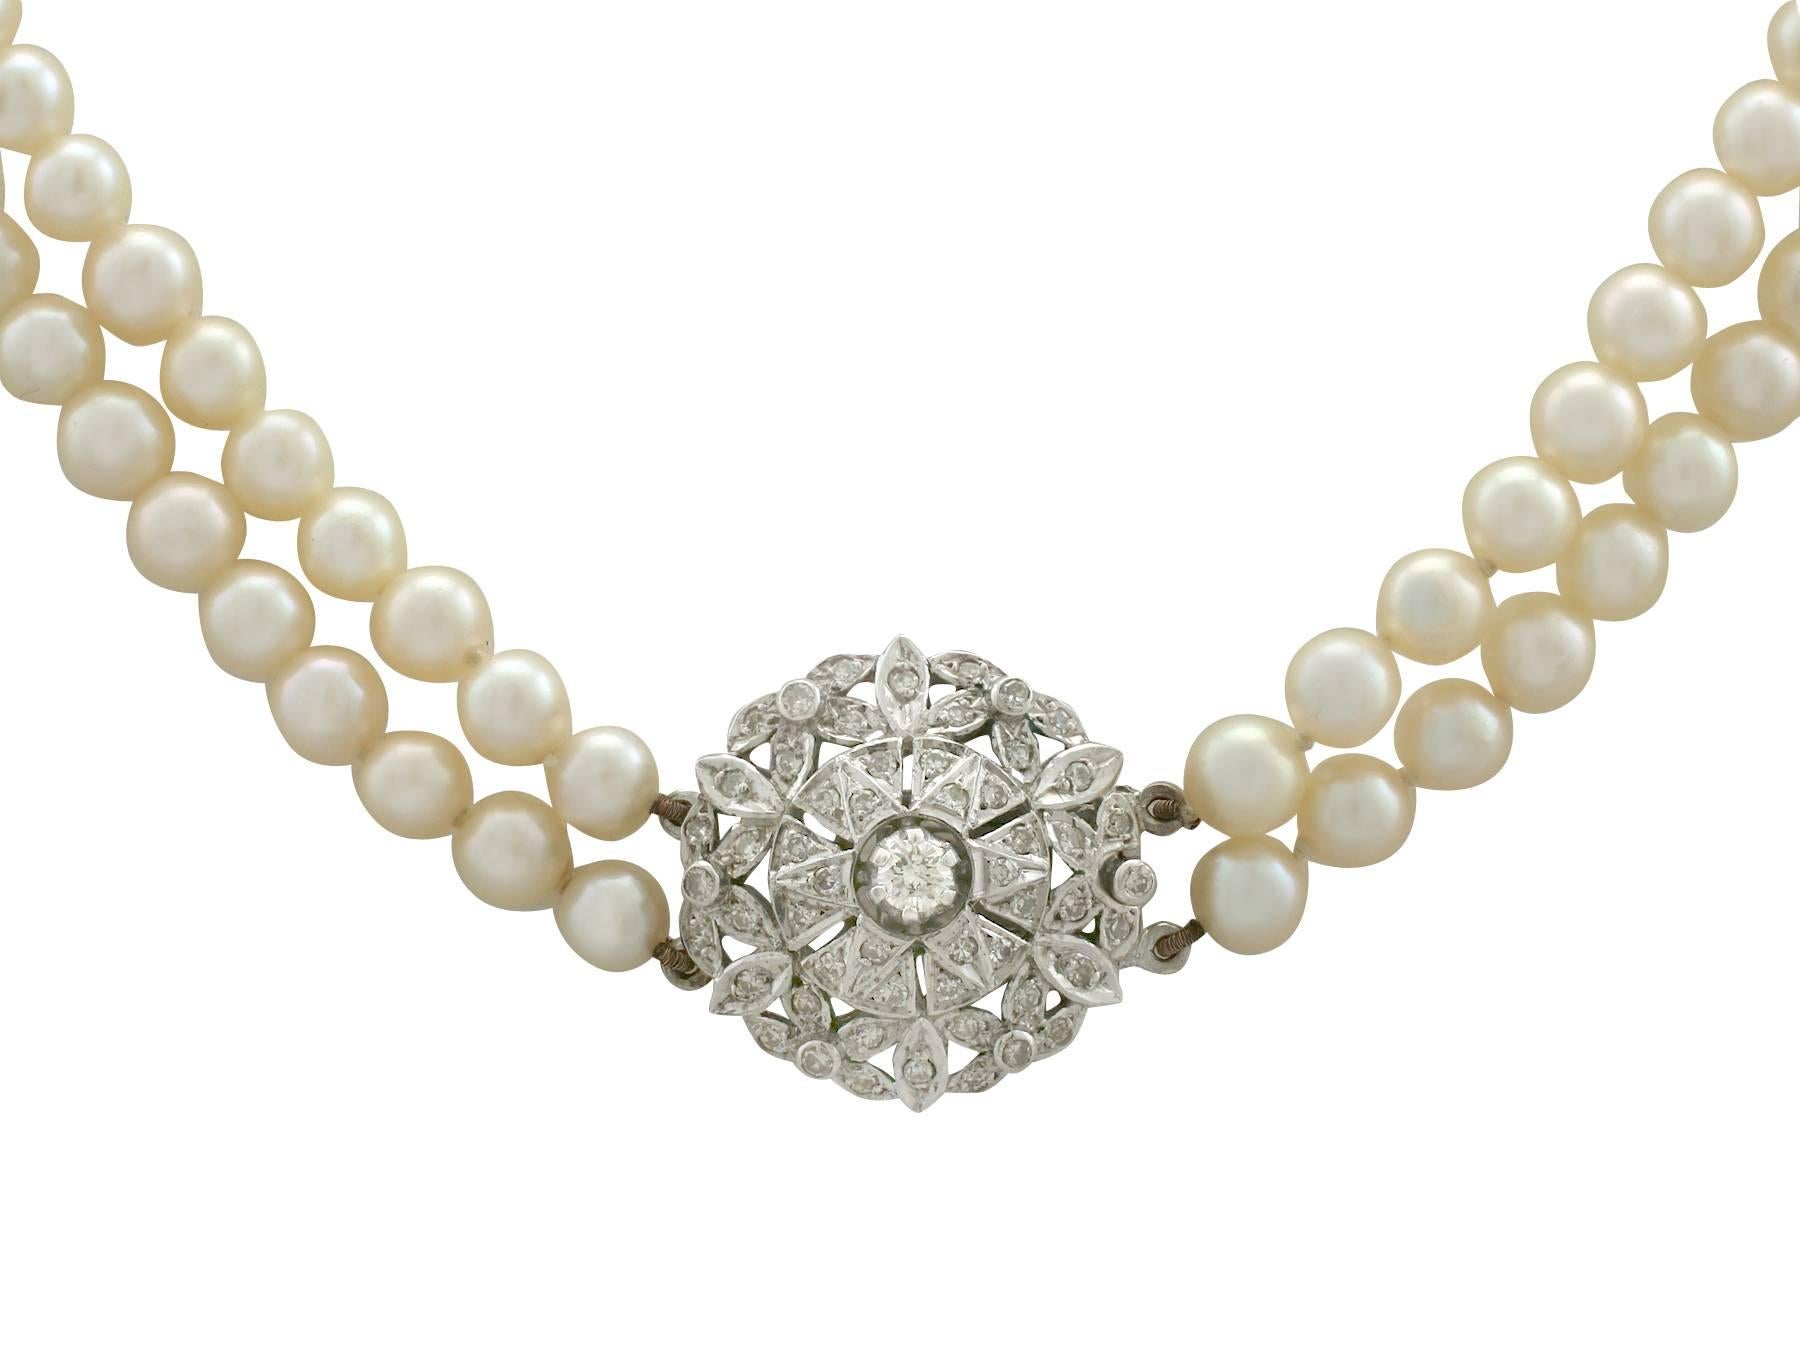 An impressive double strand cultured pearl necklace with 1.05 carat diamond, 9 karat white gold clasp; part of our diverse vintage jewelry and estate jewelry collections

This fine and impressive vintage double strand pearl necklace consists of 140